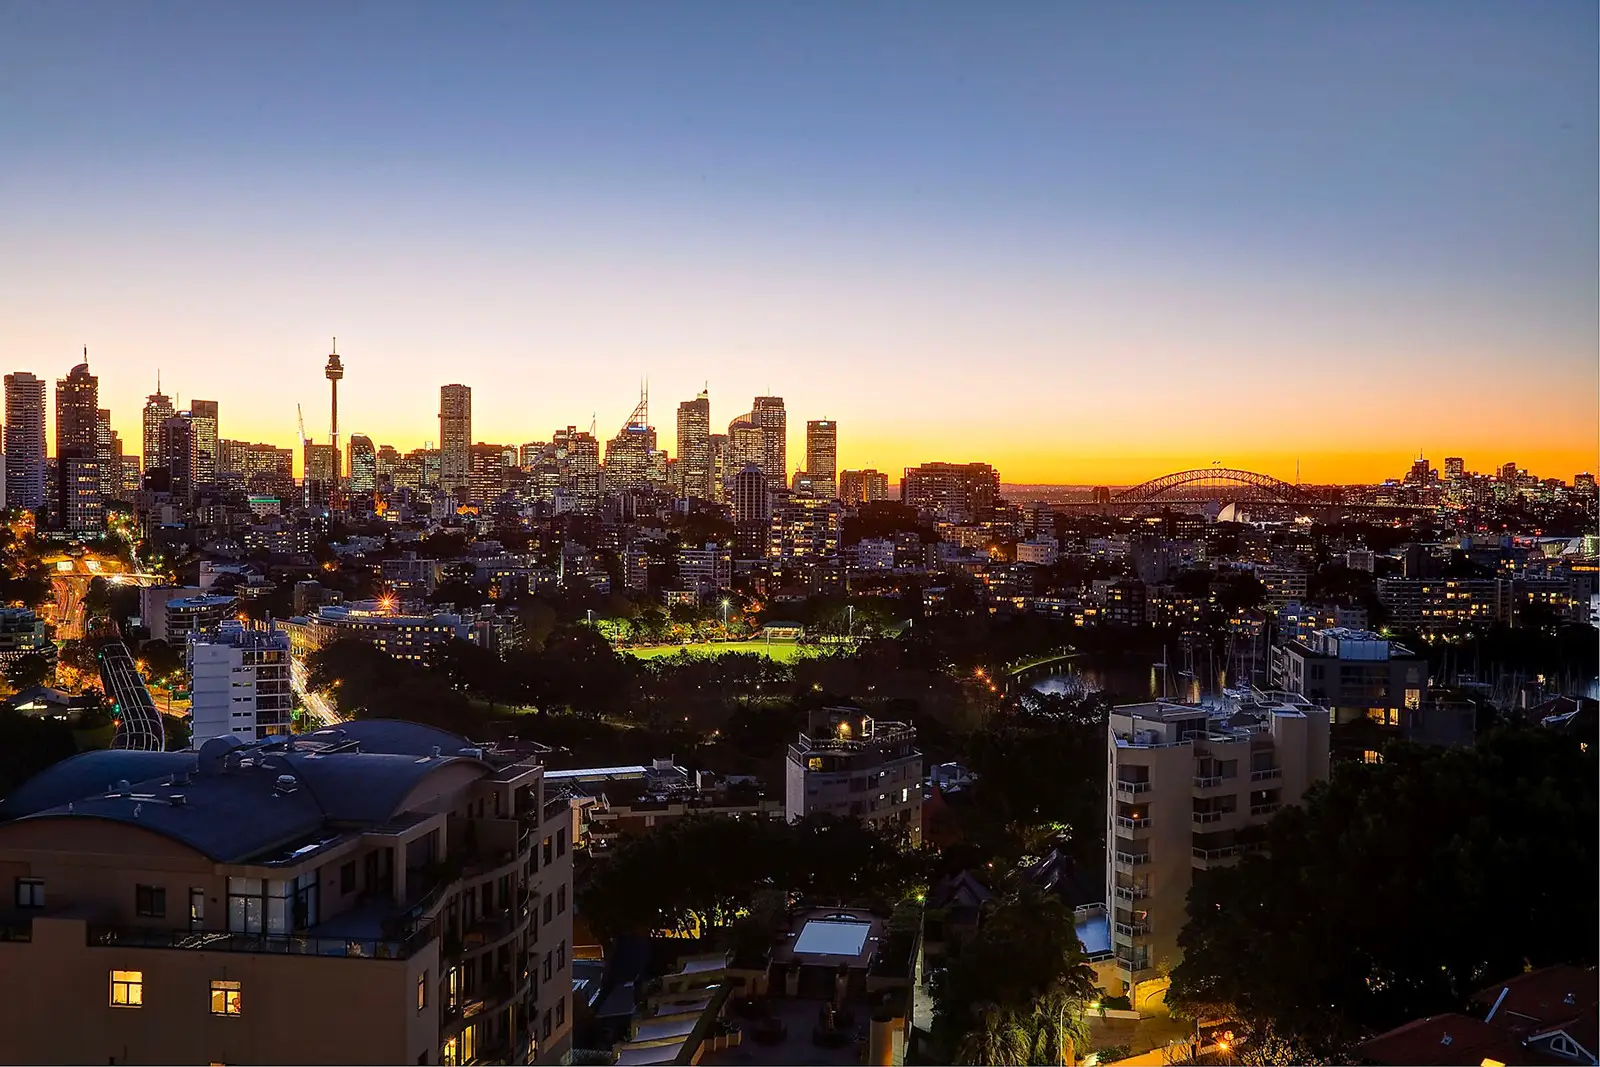 13A/3 Darling Point Road, Darling Point Leased by Sydney Sotheby's International Realty - image 1